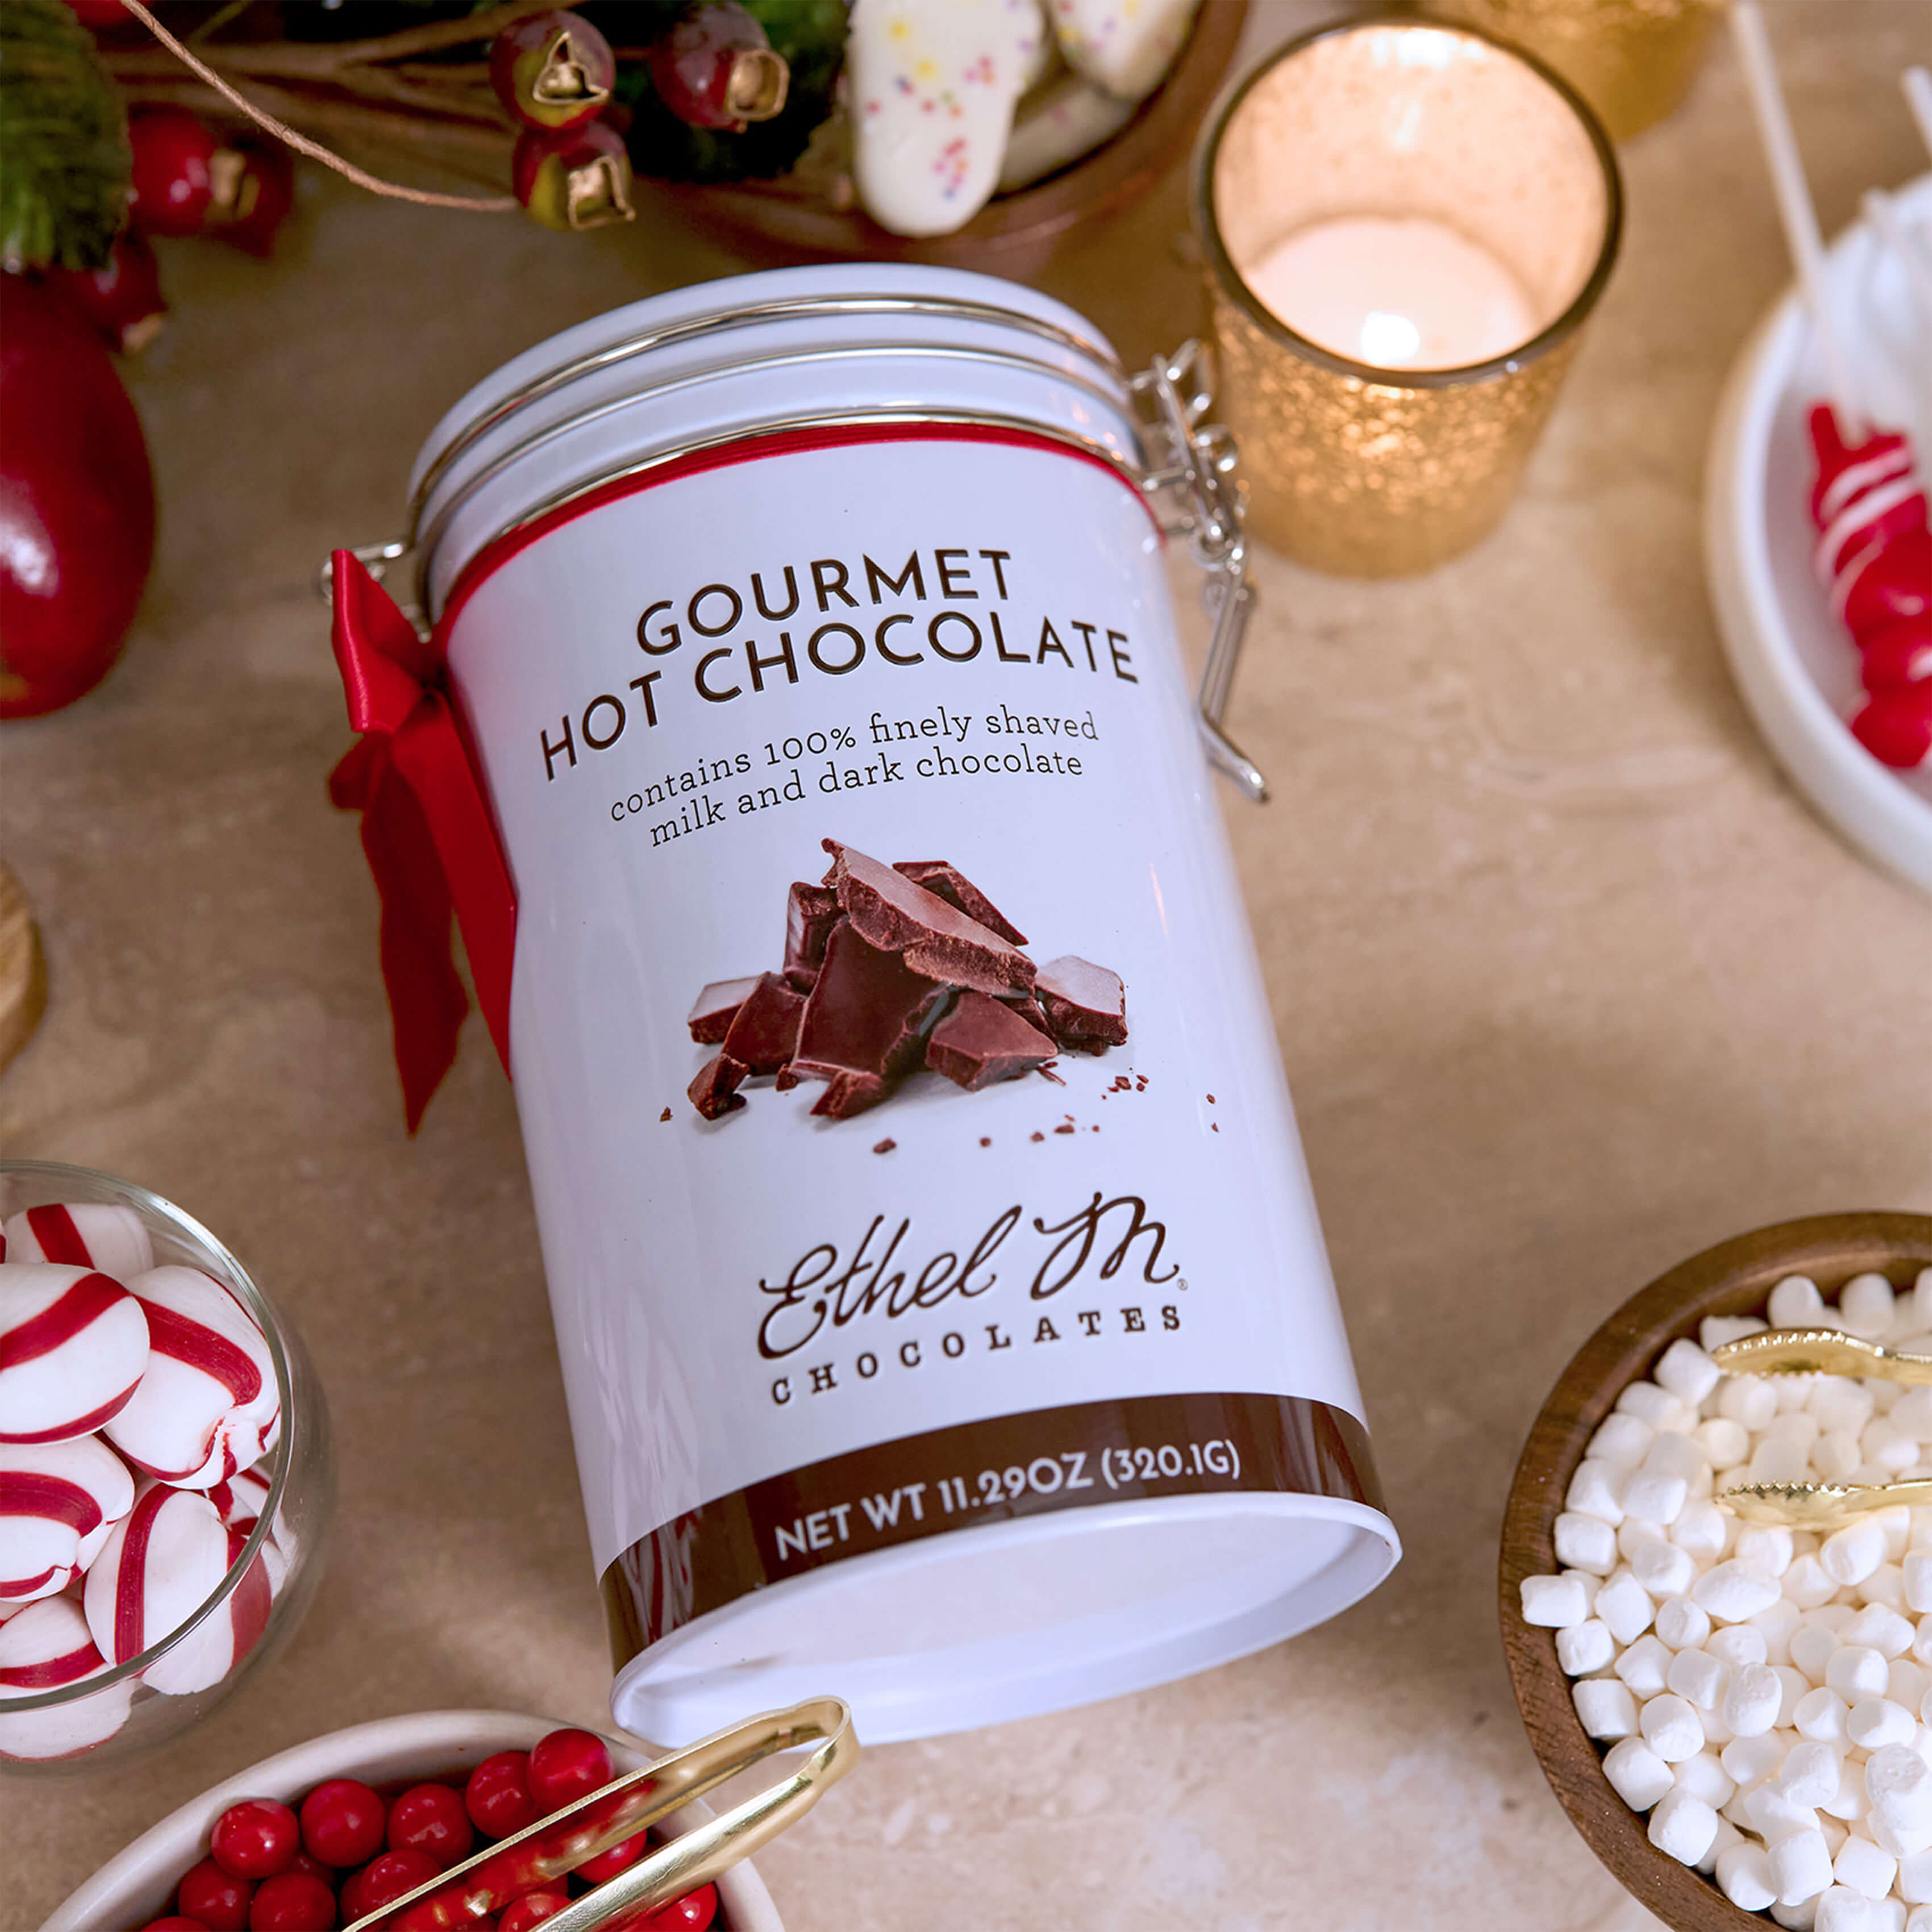 Ethel M Chocolates Gourmet Hot Chocolate Tin with Holiday Red Ribbon Lifestyle Image - Image shows the tin laying on a table surrounded by peppermints, marshmallows, and a candle